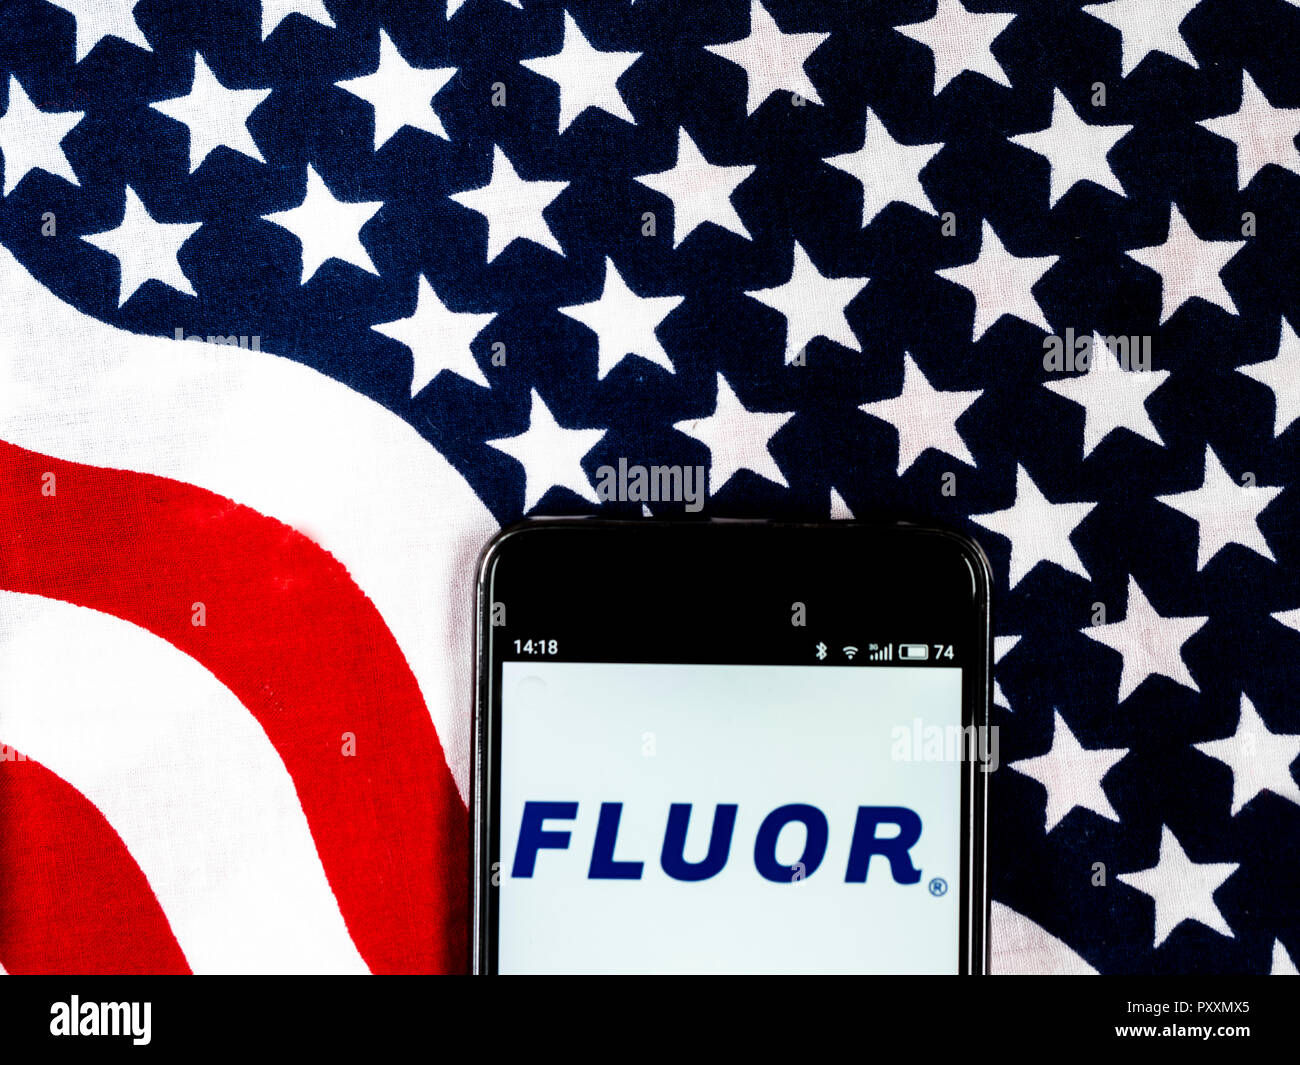 Fluor Corporation Engineering company logo seen displayed on smart phone. Fluor Corporation is a multinational engineering and construction firm headquartered in Irving, Texas. It is a holding company that provides services through its subsidiaries in the following areas: oil and gas, industrial and infrastructure, government and power. Stock Photo